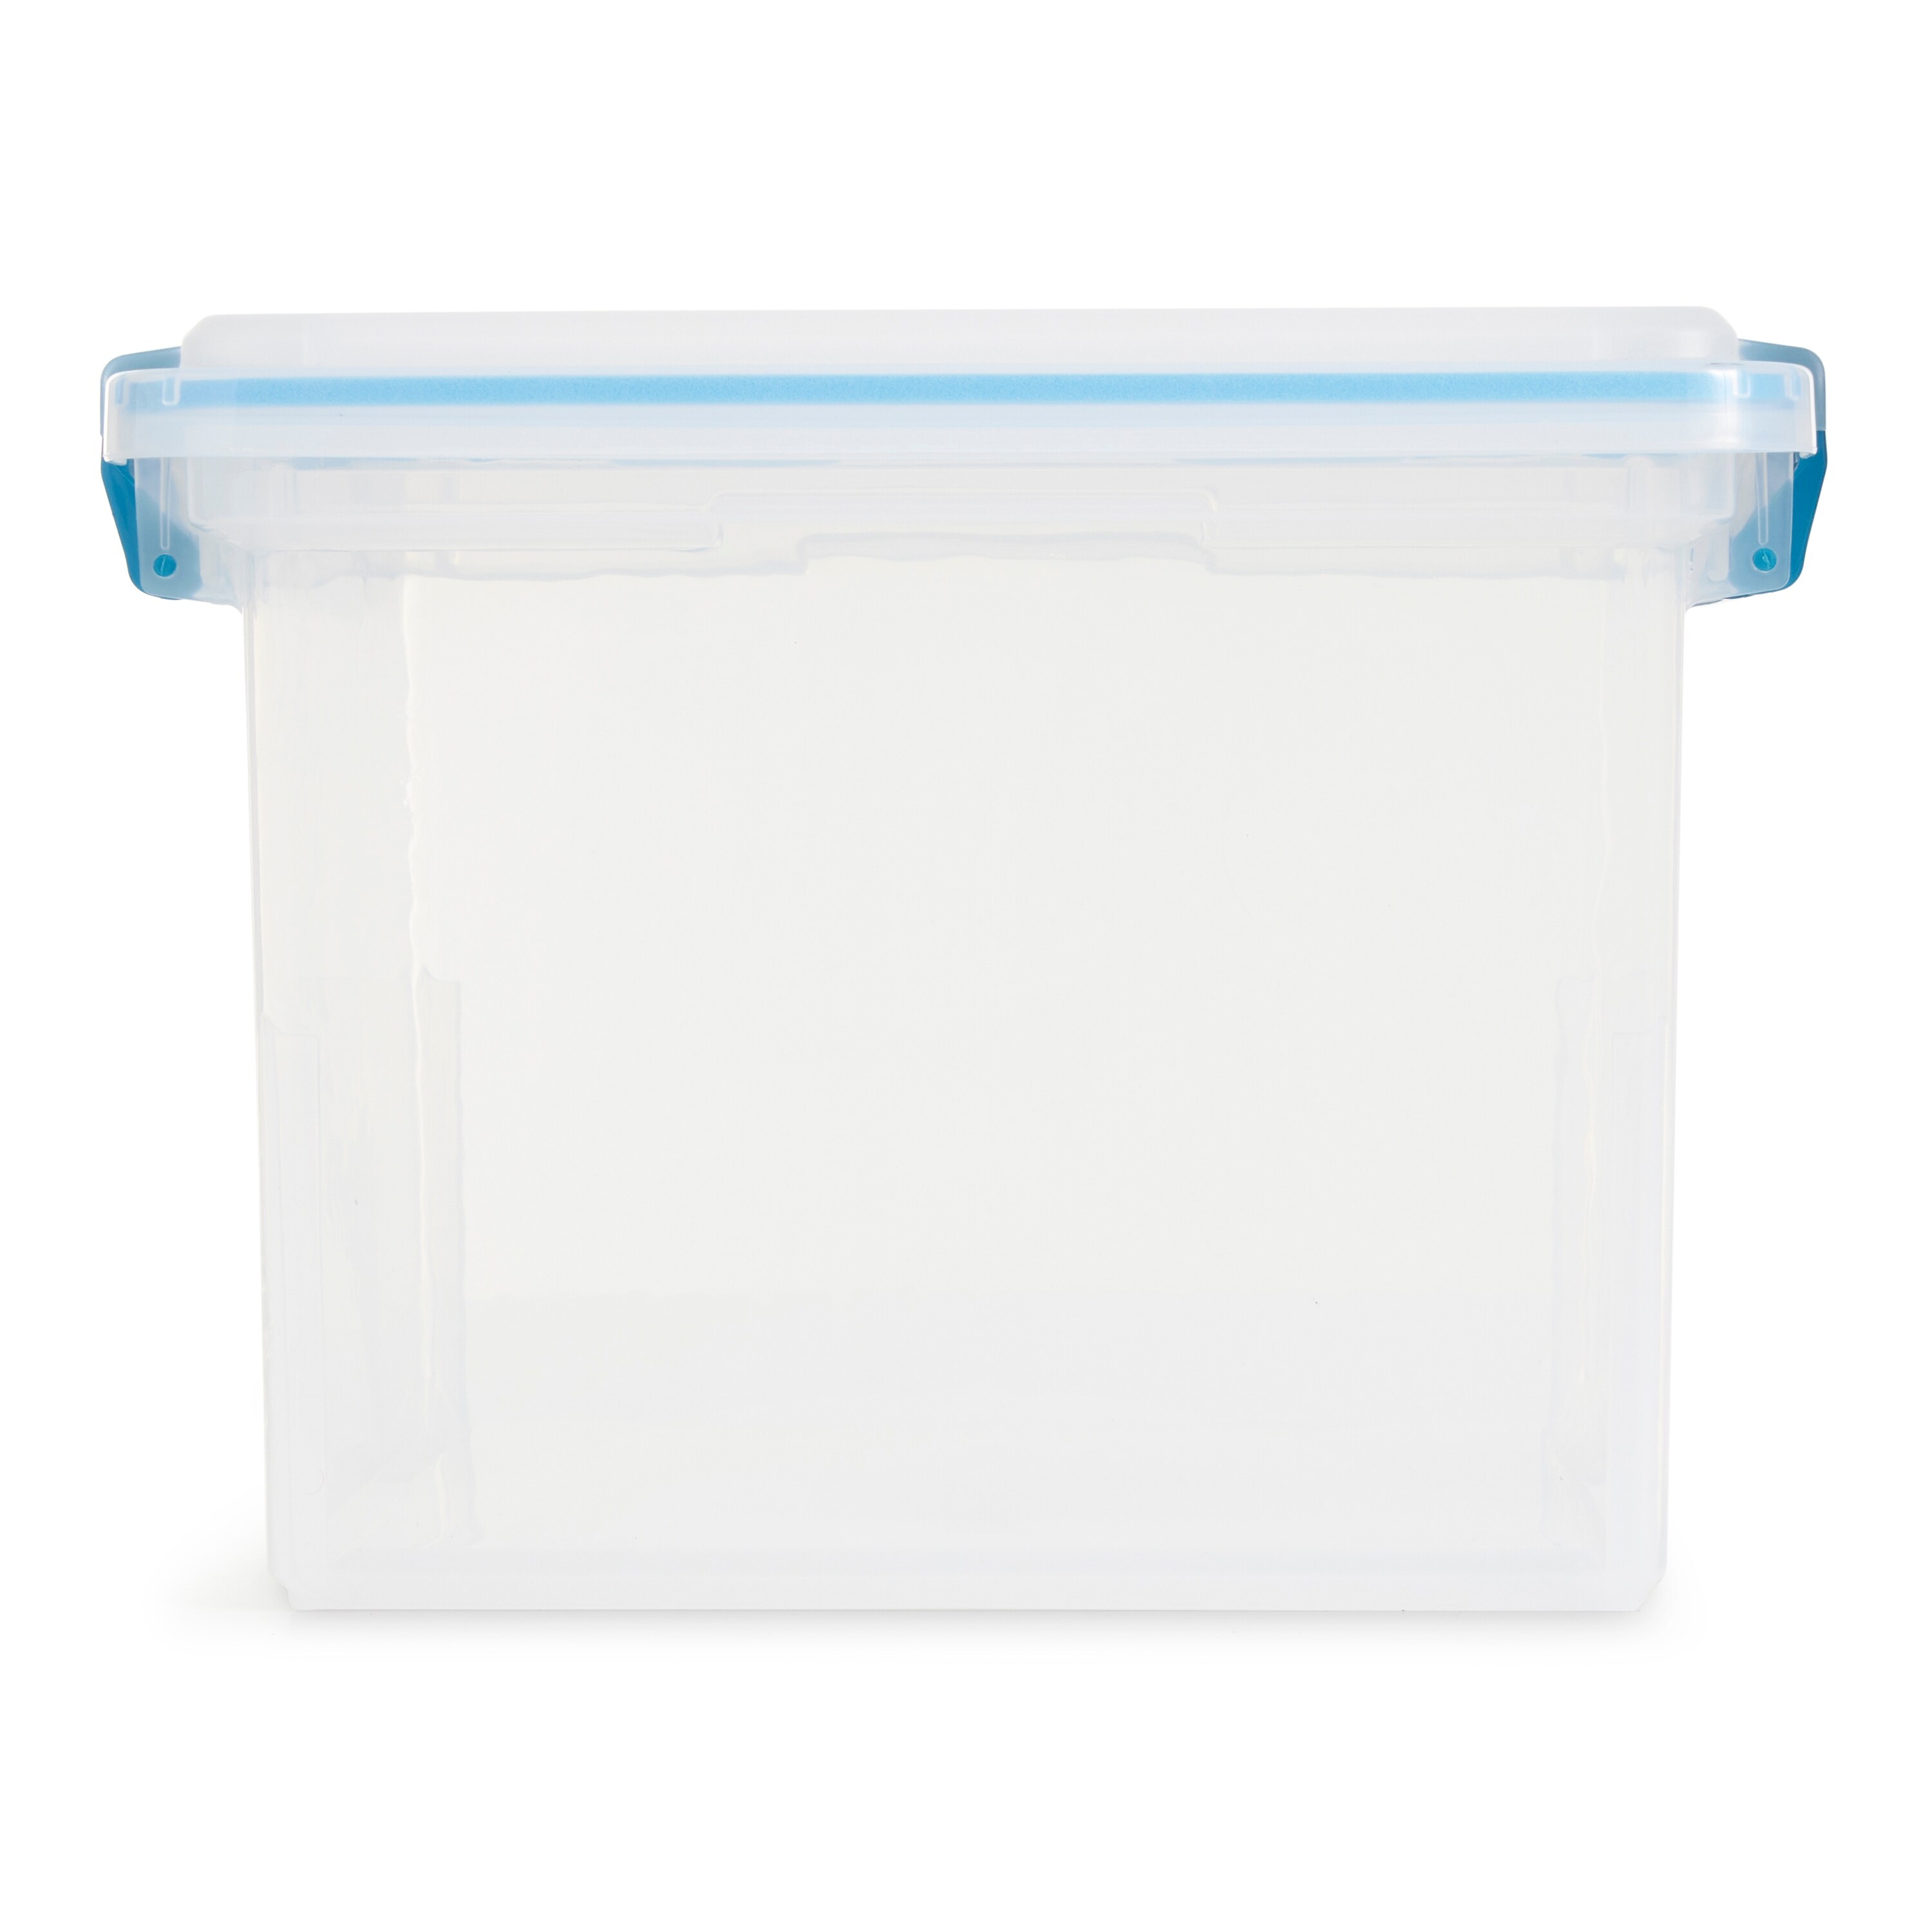 https://ak1.ostkcdn.com/images/products/is/images/direct/5ceda176ec6c48db7948579b9194a41d91e4fb7a/Sterilite-32-Quart-Clear-Stacking-Storage-Container-with-Gasket-Lid%2C-12-Pack.jpg